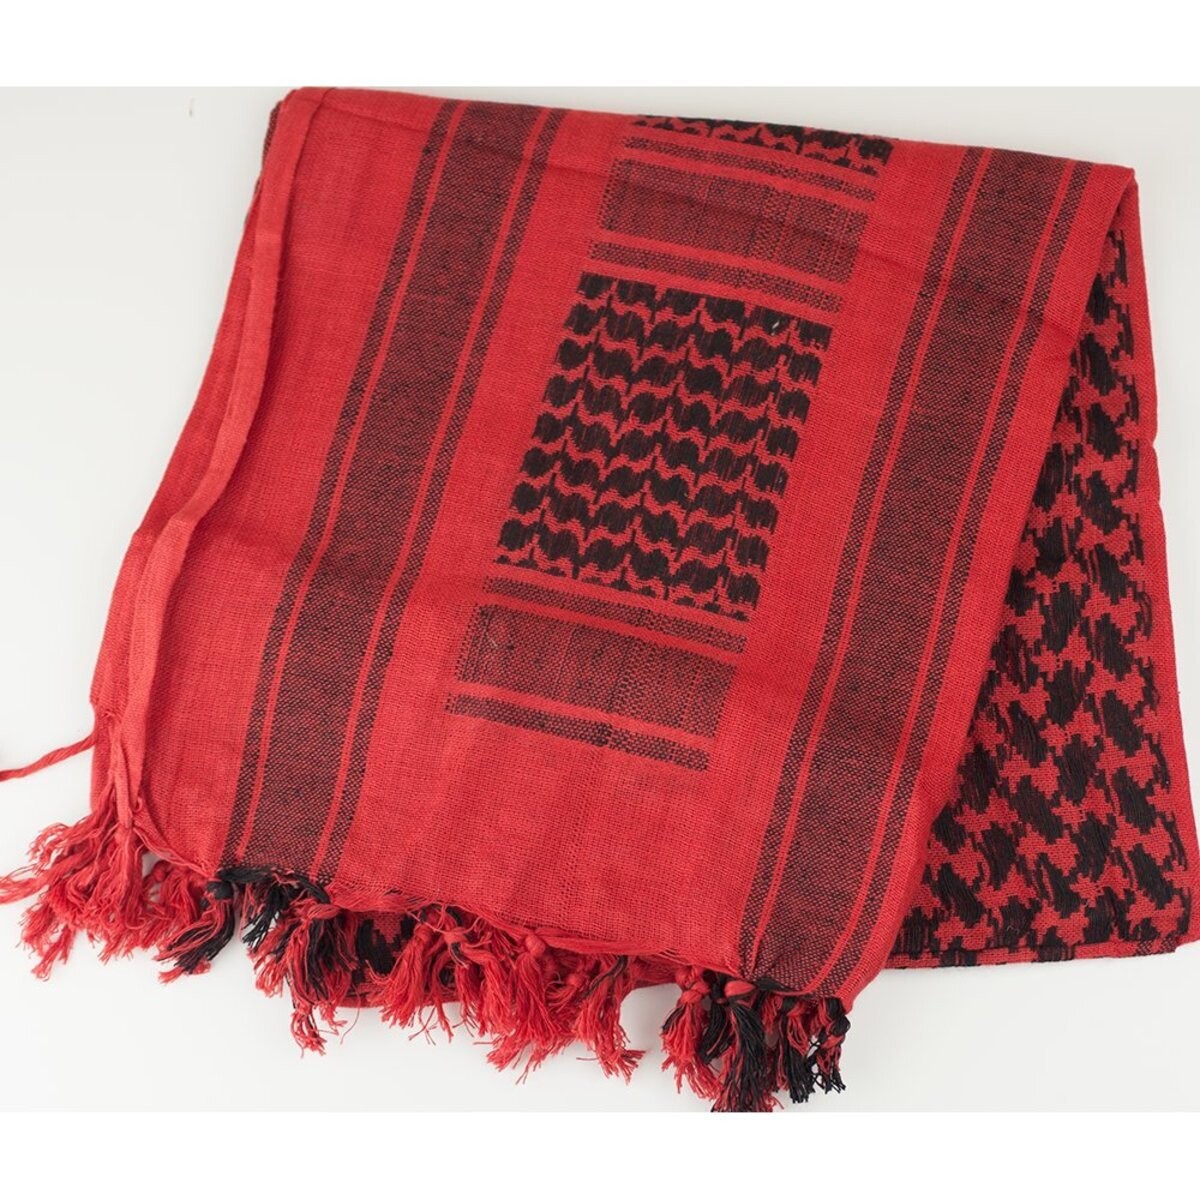 Valken Shemagh Face Wrap - Red/Black